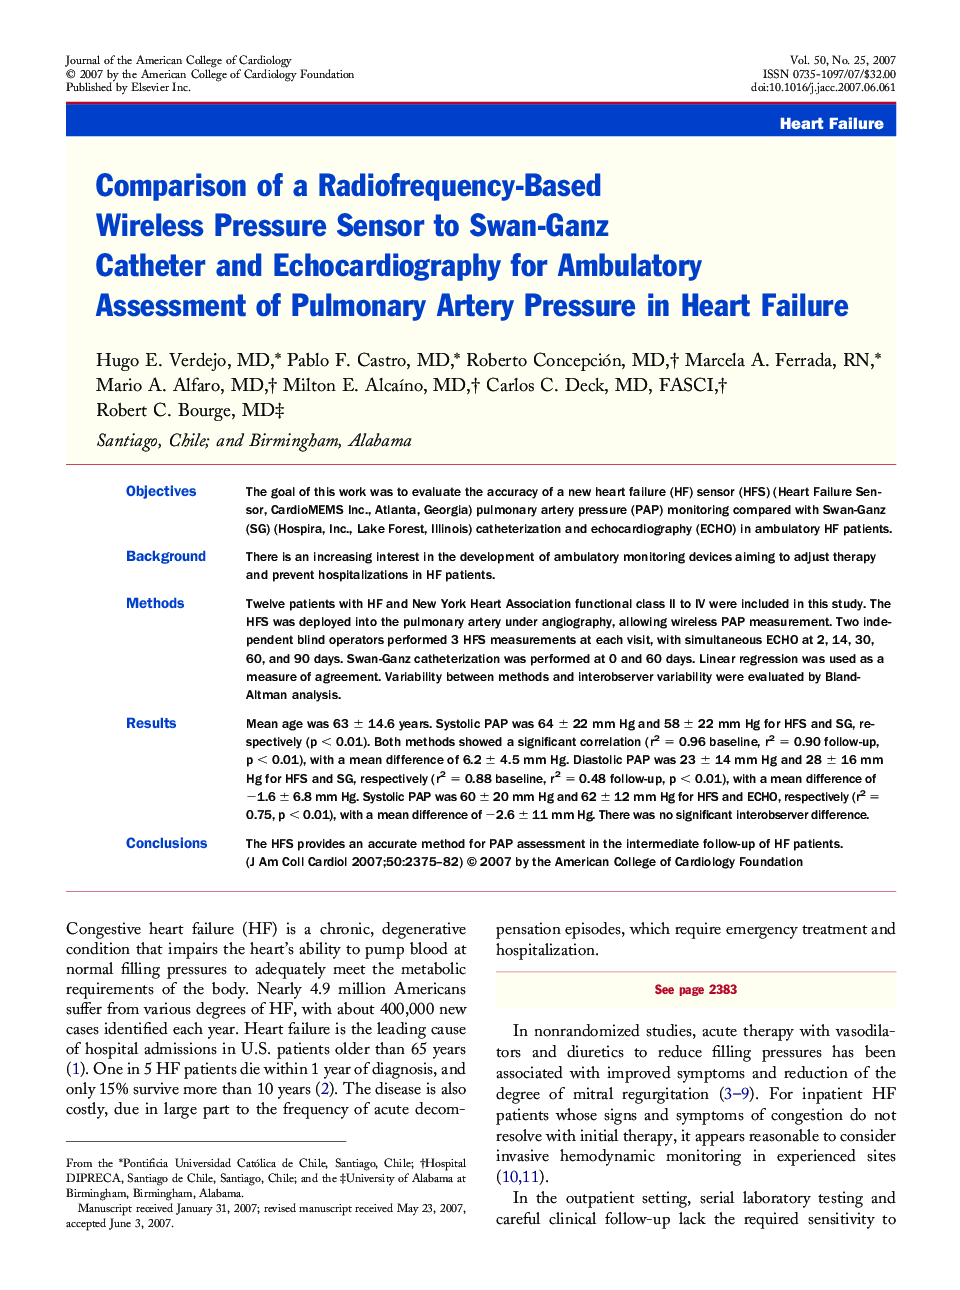 Comparison of a Radiofrequency-Based Wireless Pressure Sensor to Swan-Ganz Catheter and Echocardiography for Ambulatory Assessment of Pulmonary Artery Pressure in Heart Failure